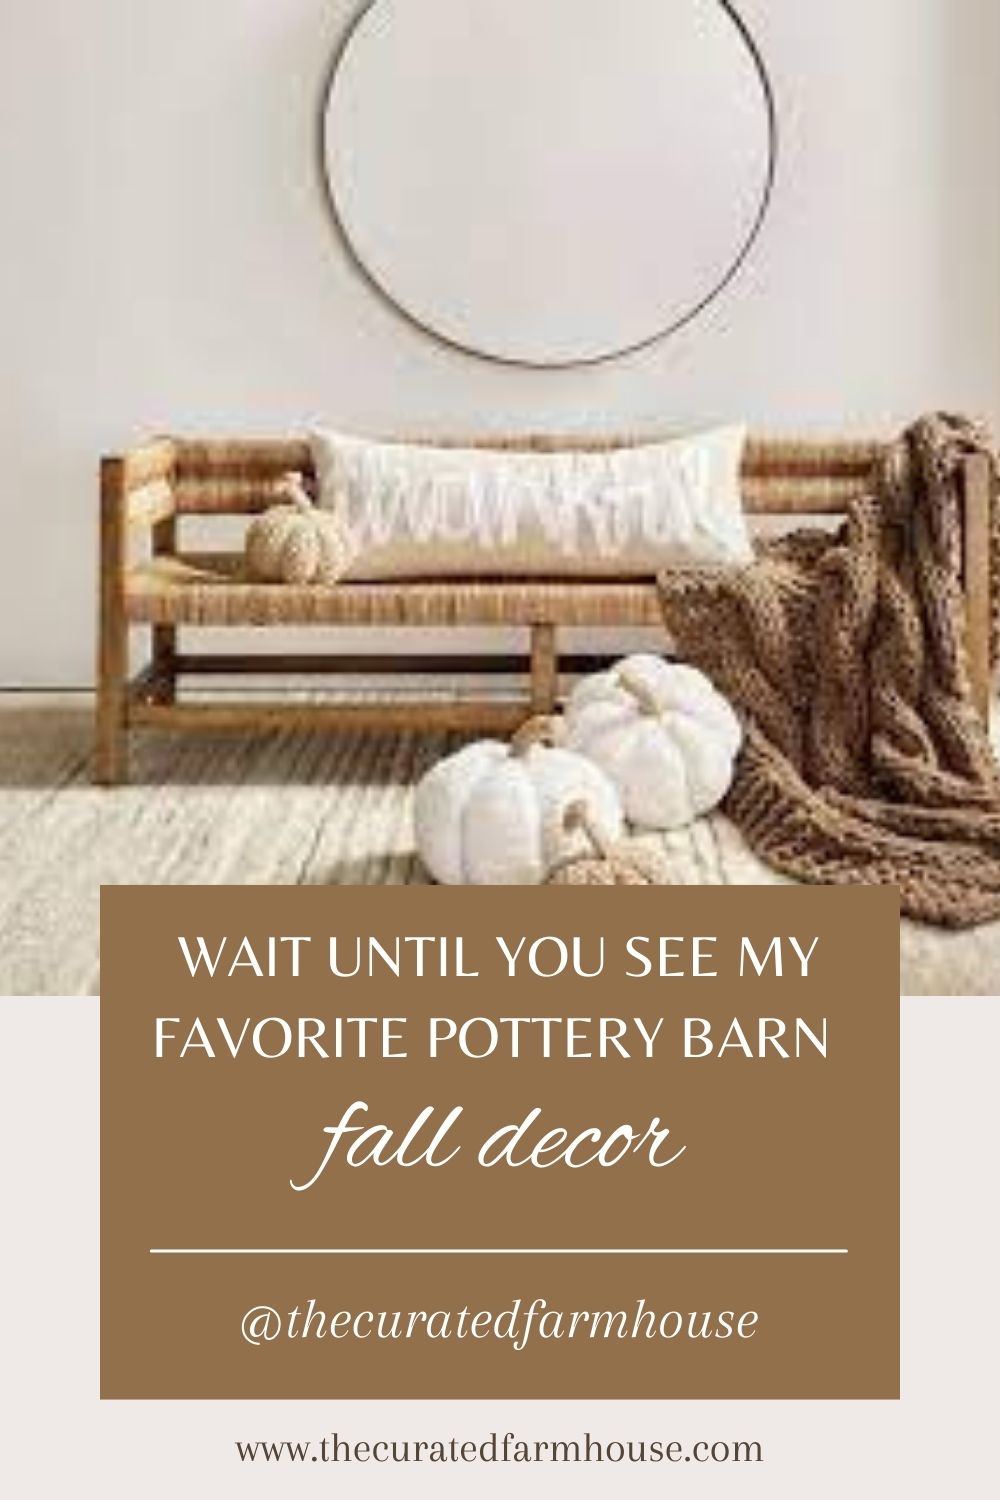 Wait Until You See My Favorite Pottery Barn Fall Decor